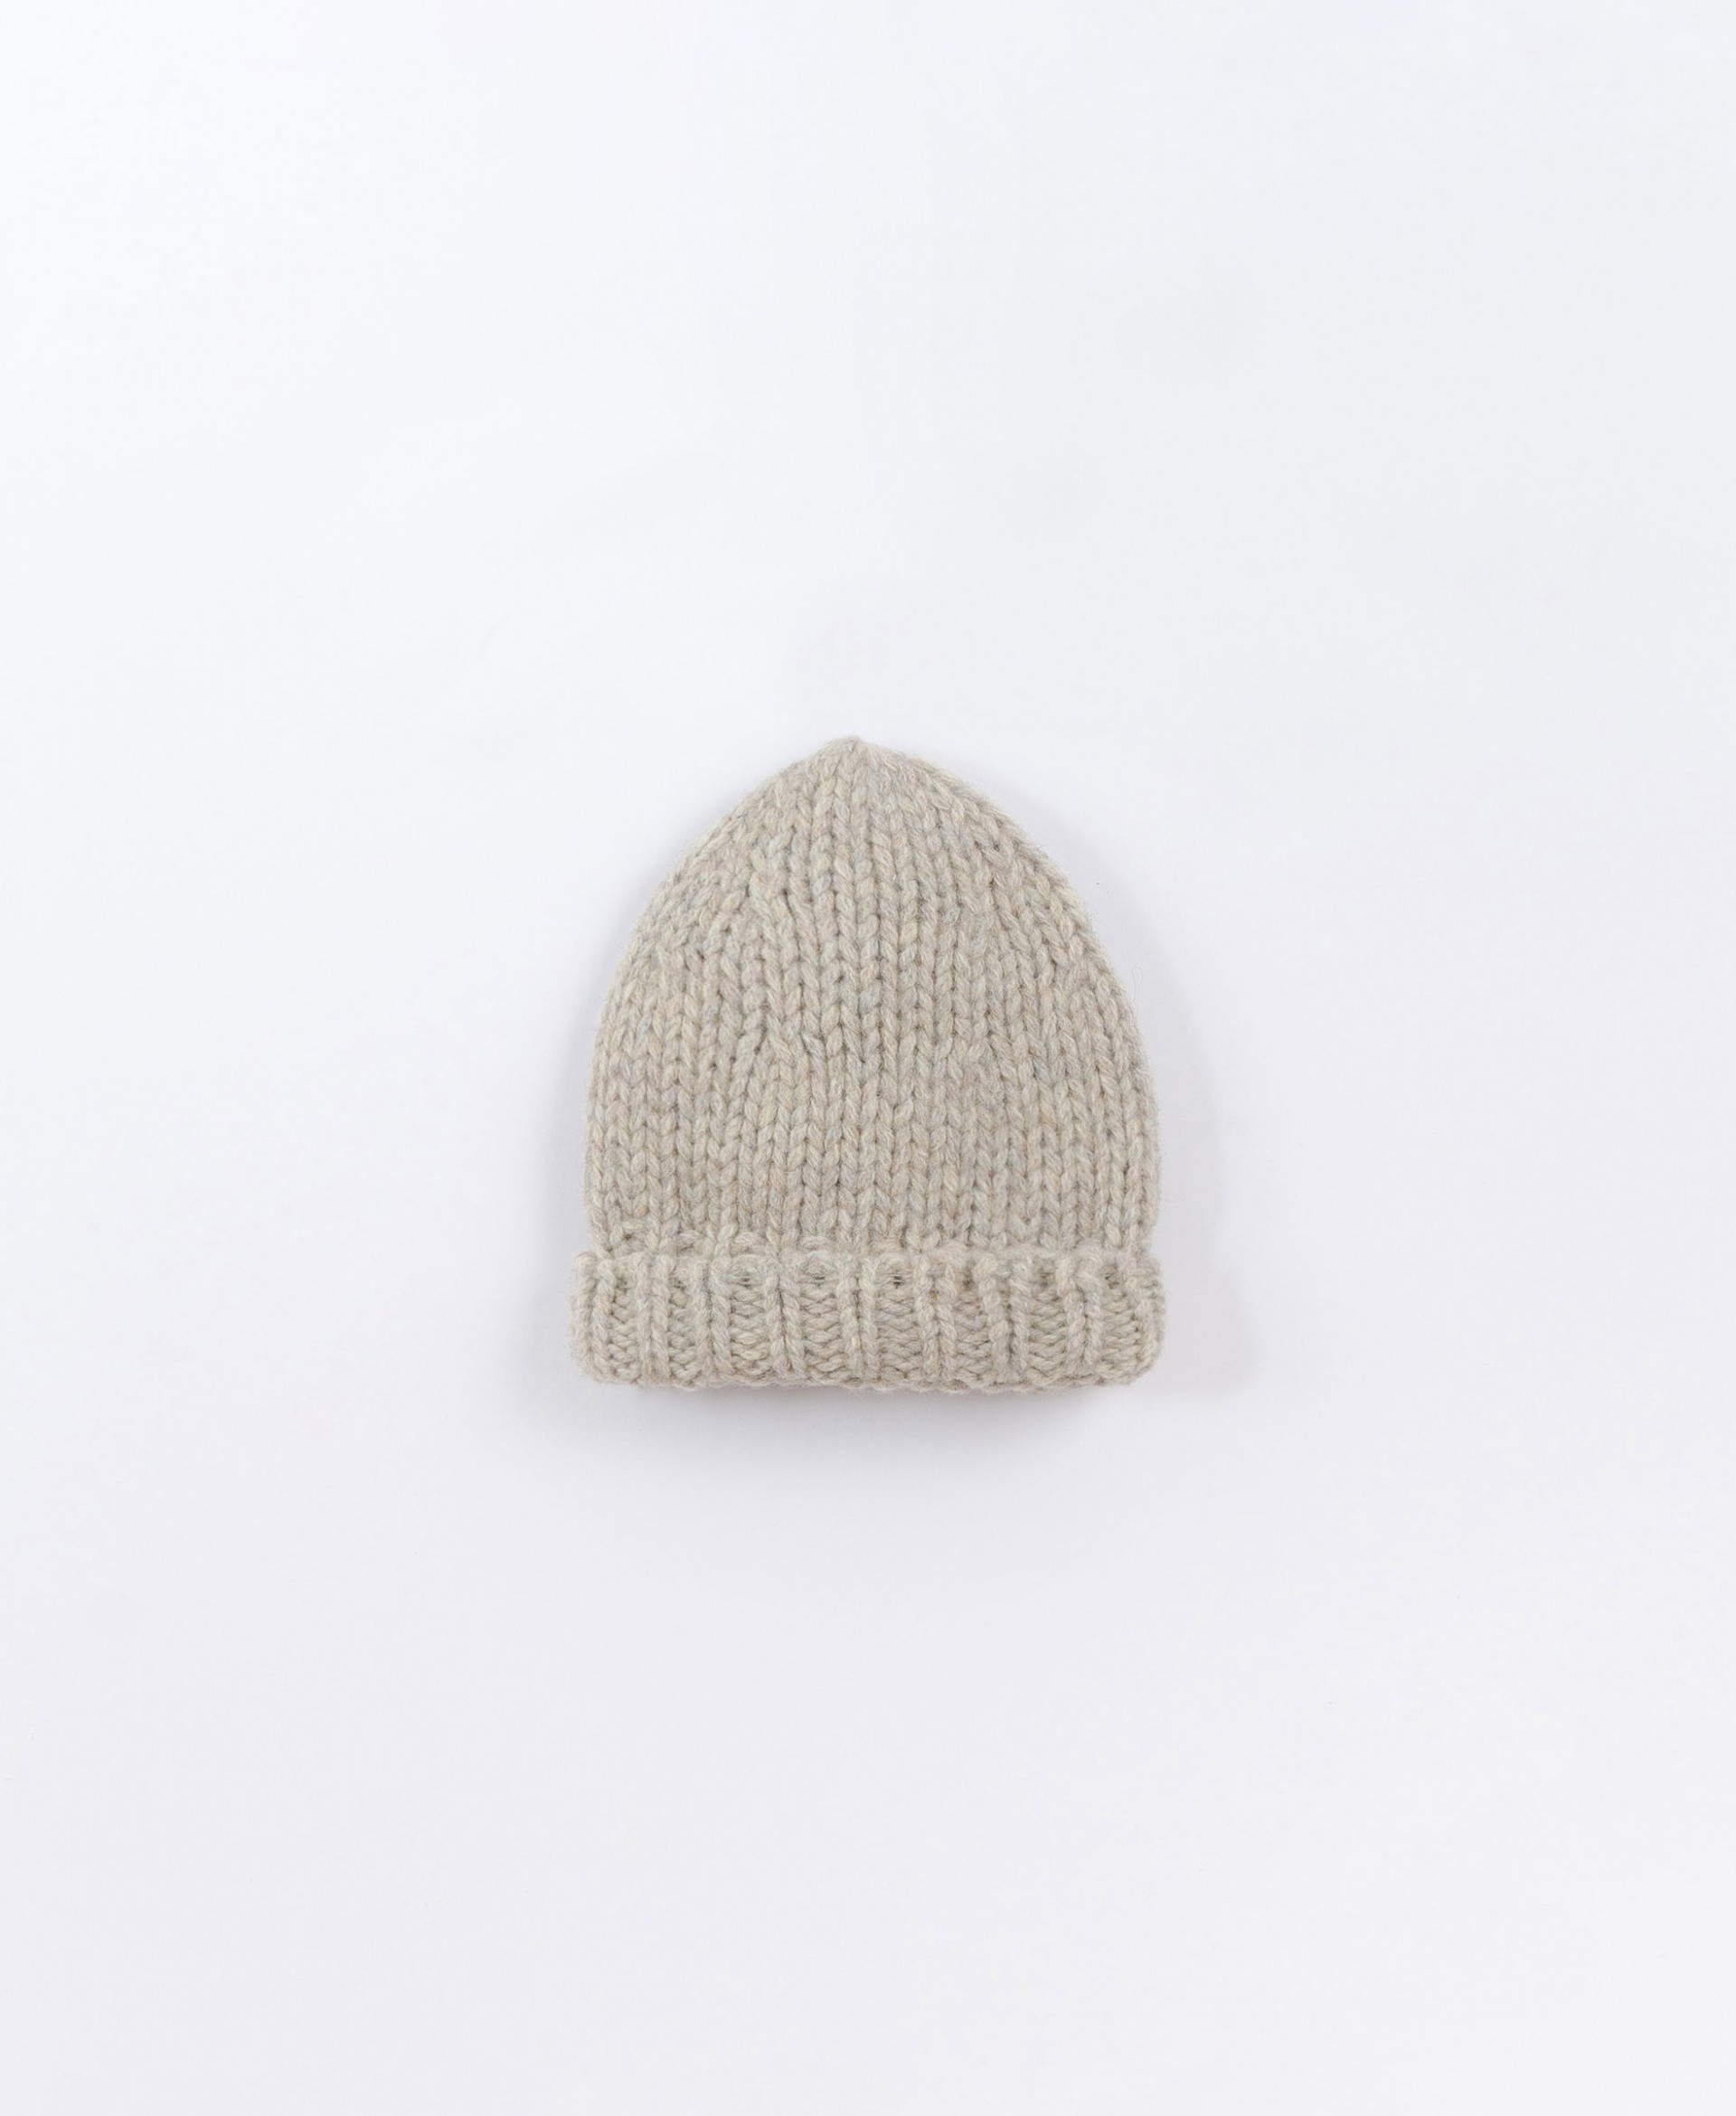 Knitted beanie | Culinary